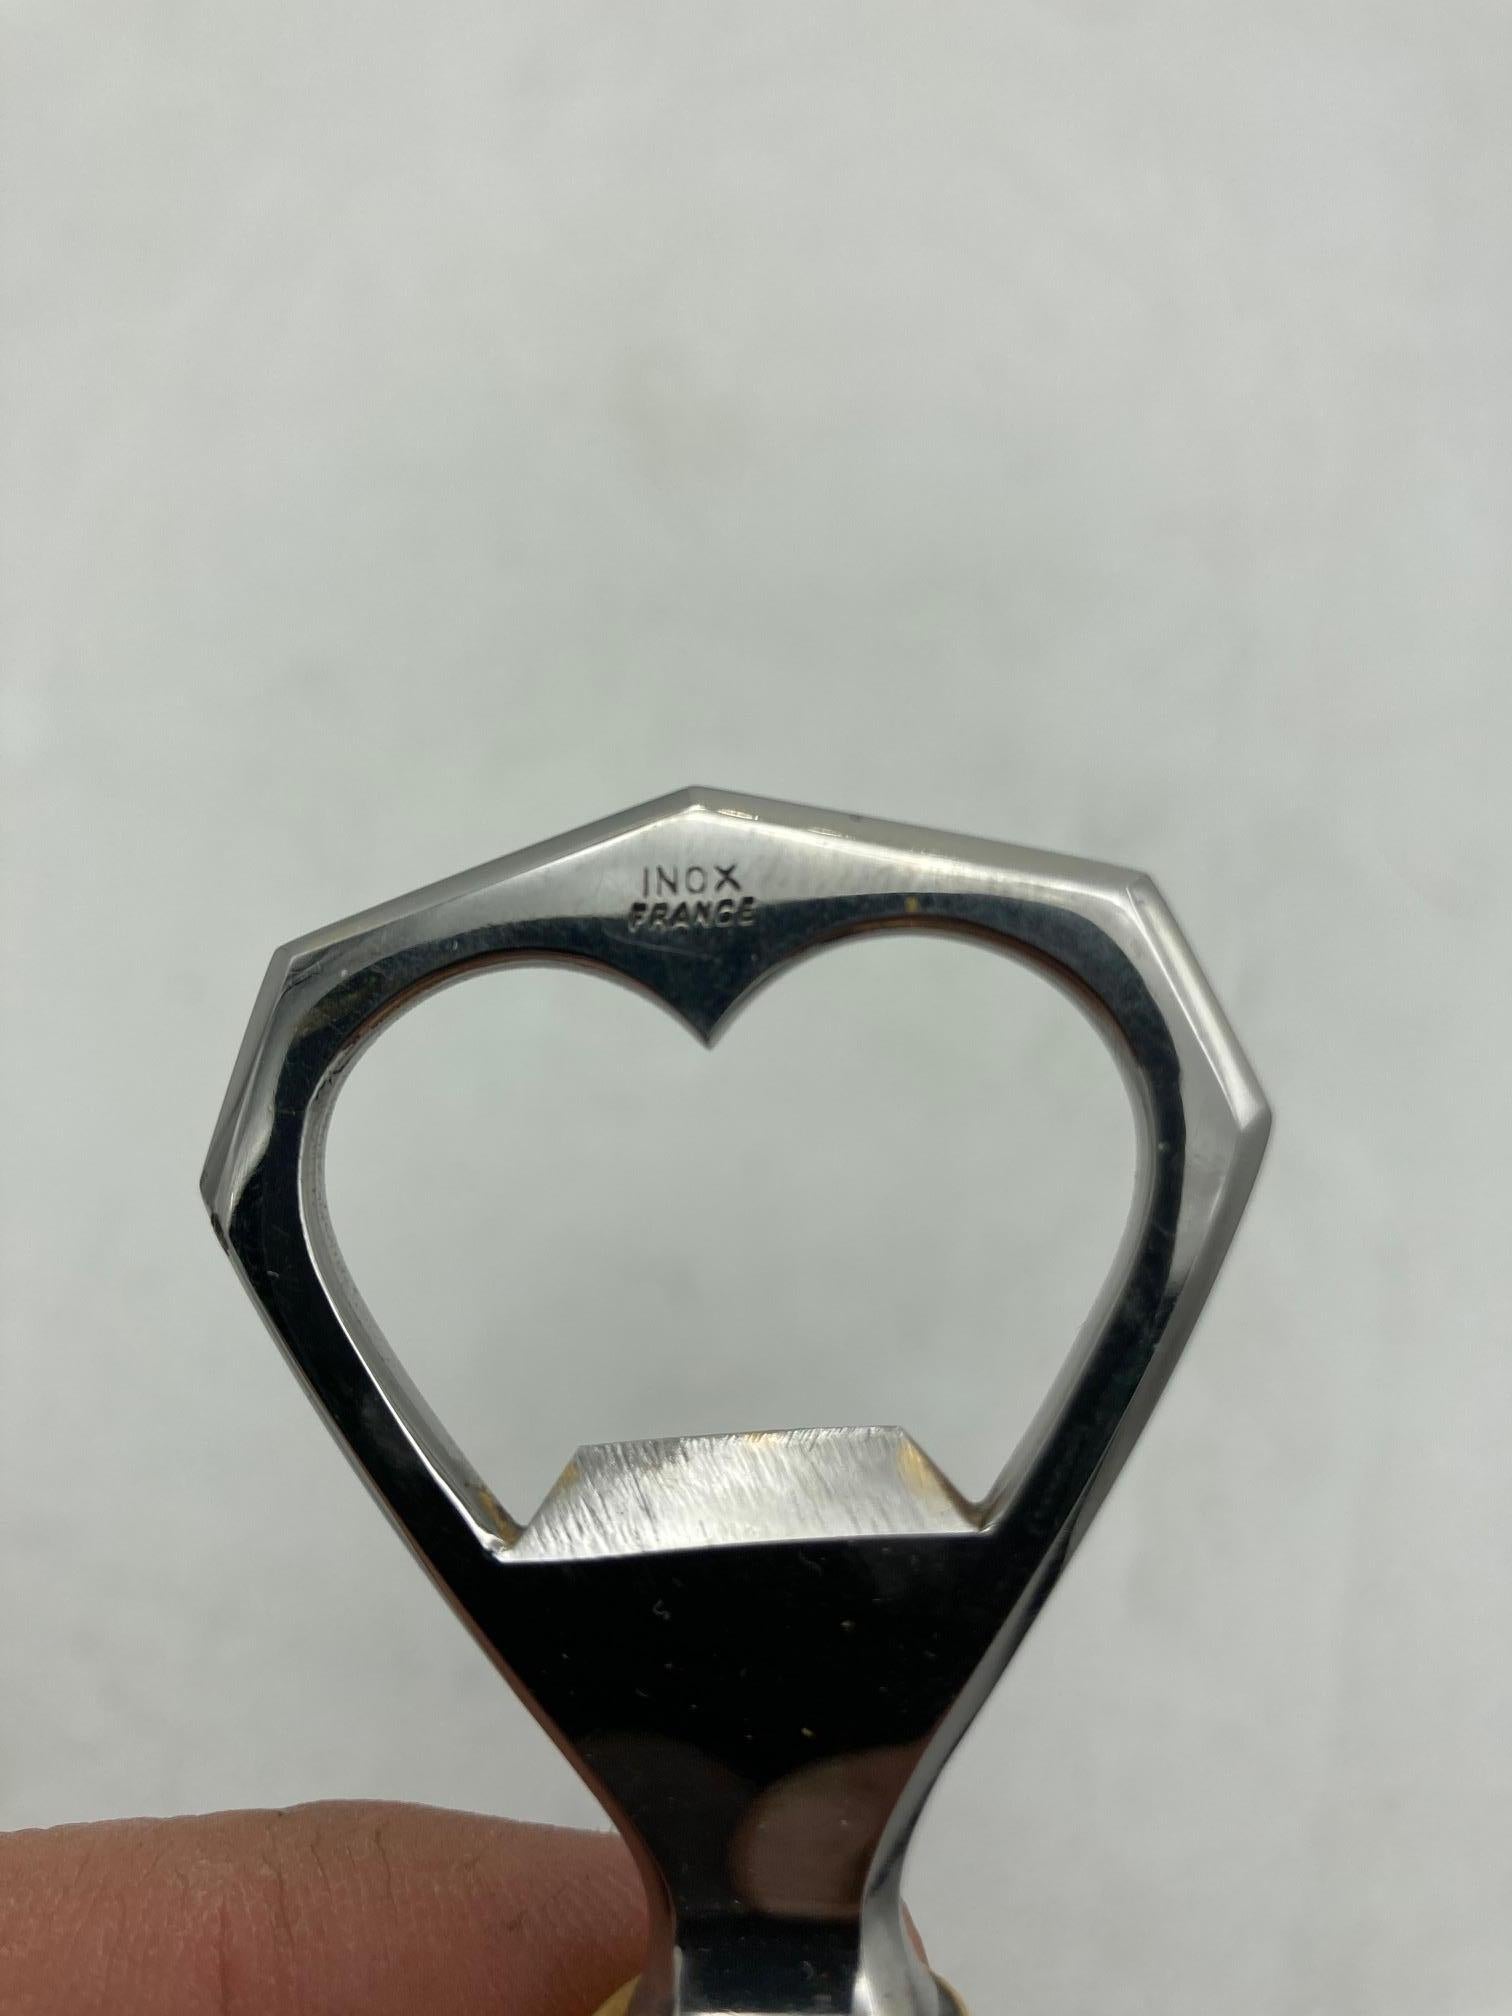 Rare Bottle-opener signed Hermès
France
1970s
Great condition.